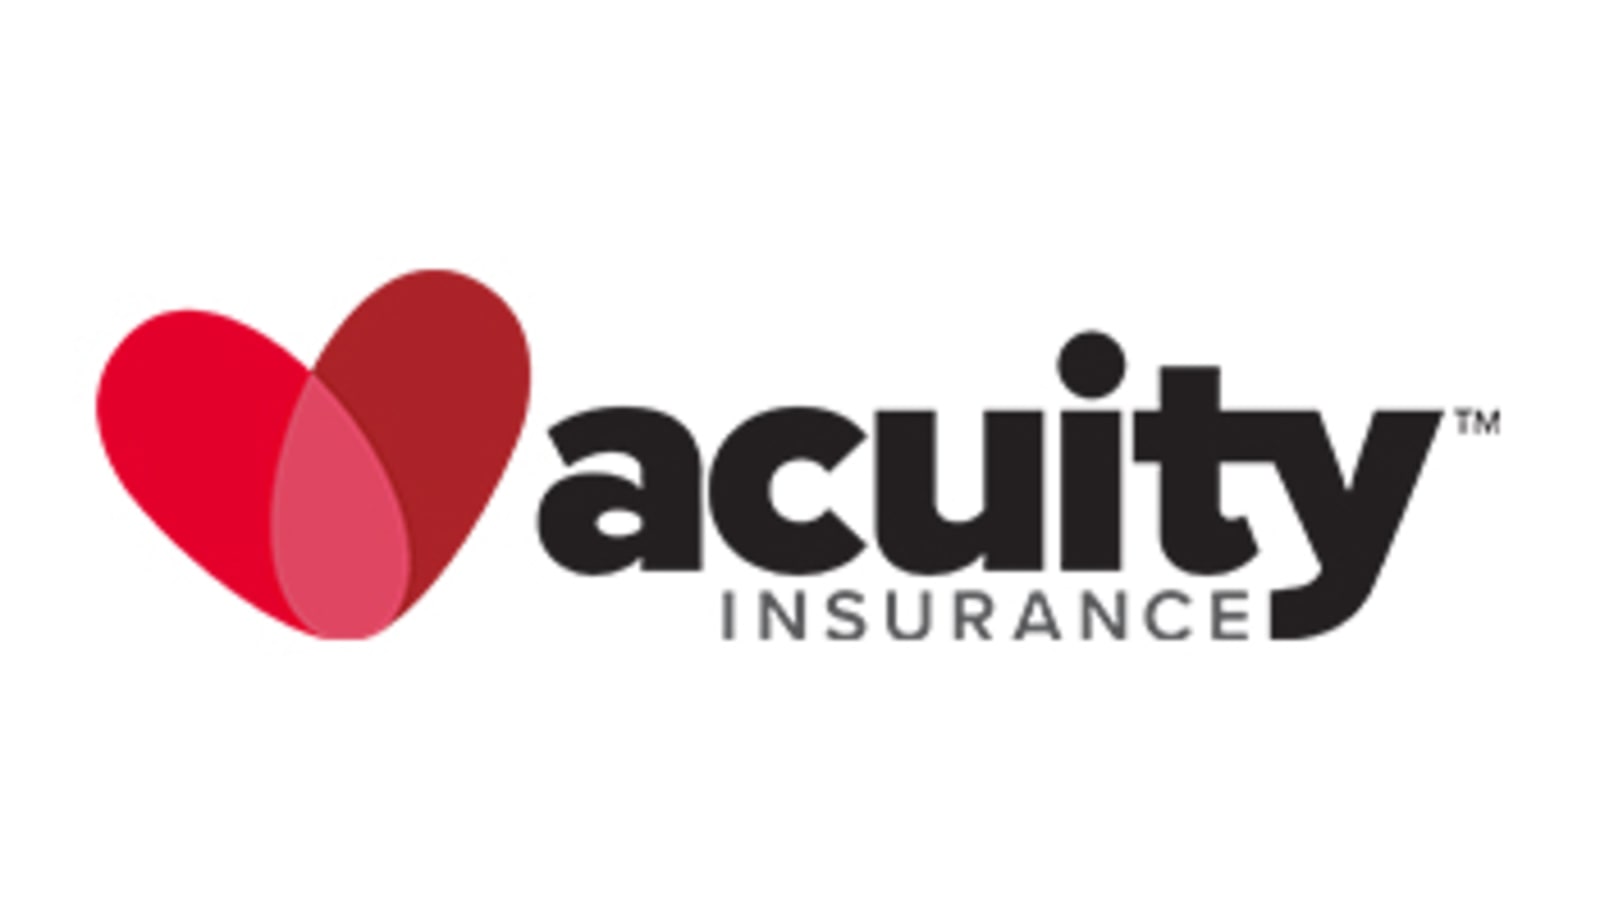 Acuity Insurance Review - ValuePenguin